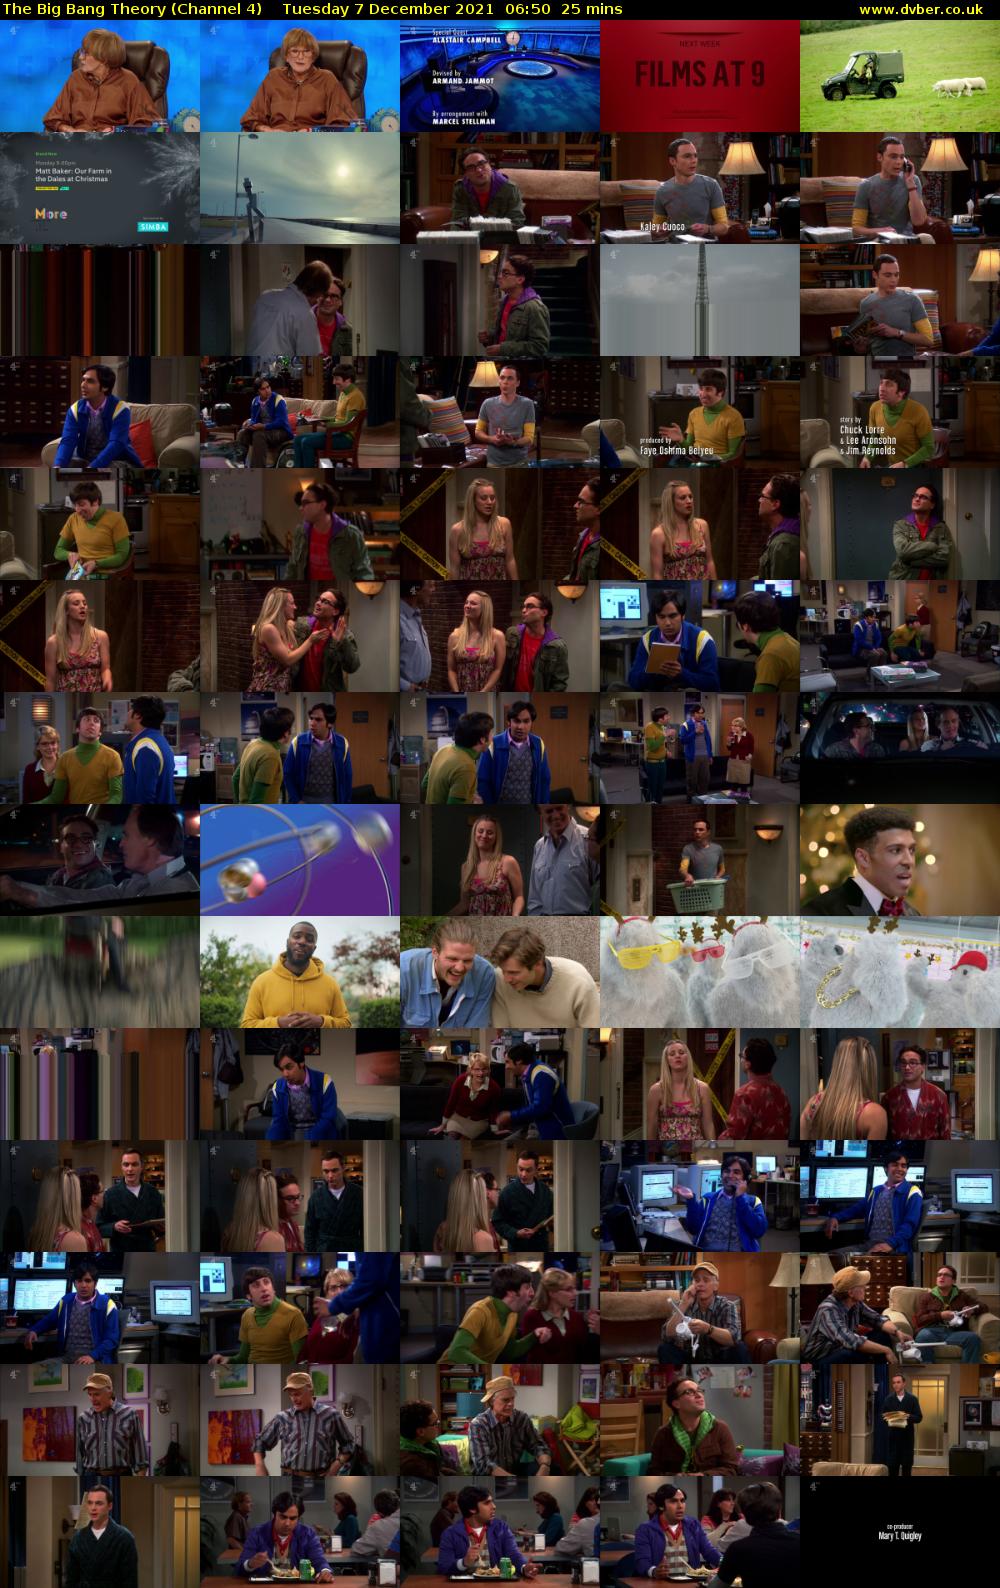 The Big Bang Theory (Channel 4) Tuesday 7 December 2021 06:50 - 07:15